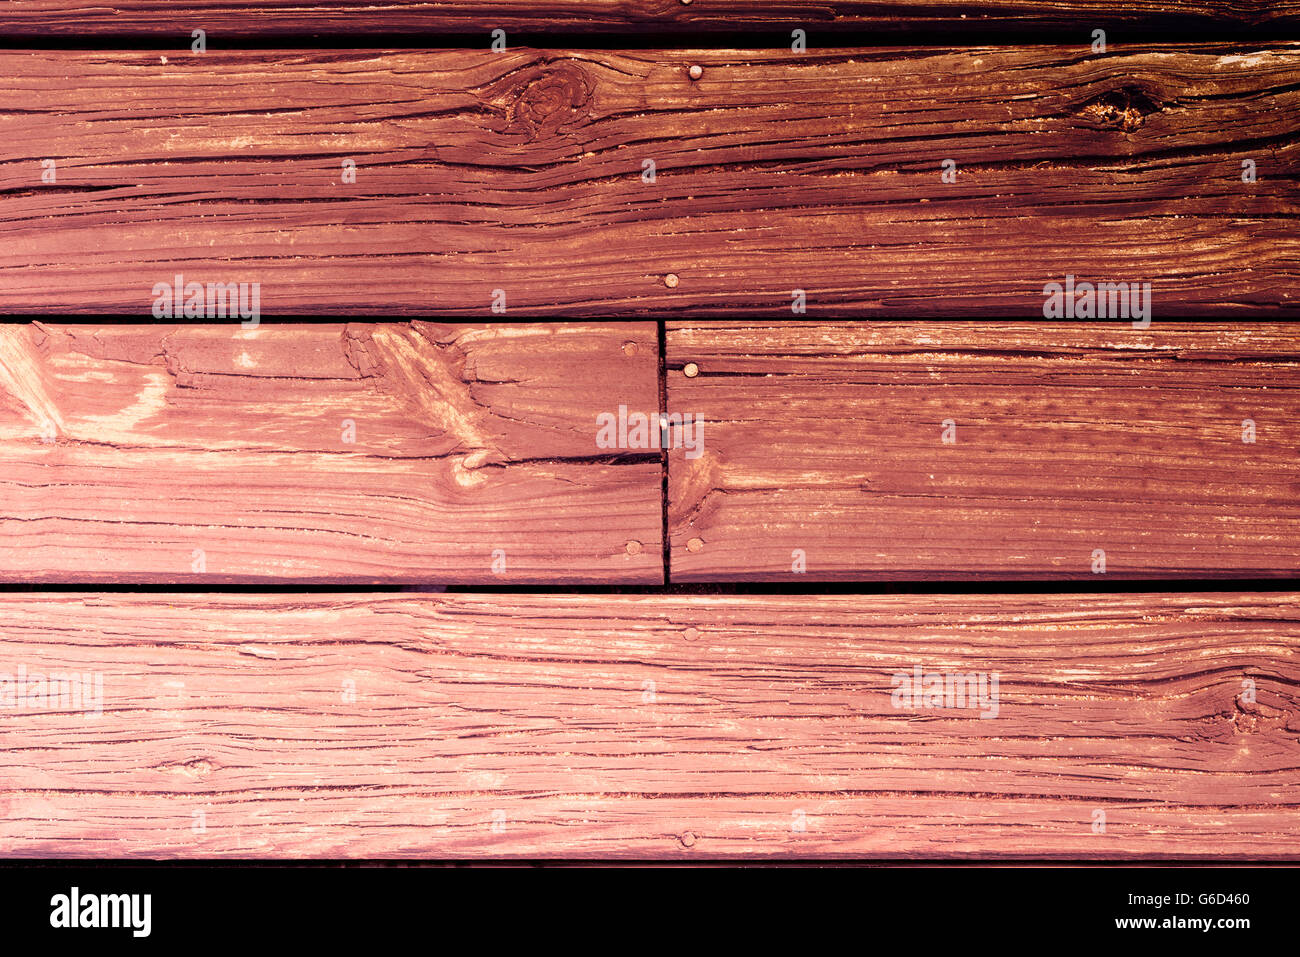 Colored old wooden plank floor background, top view of vintage style rustic wood texture. Stock Photo